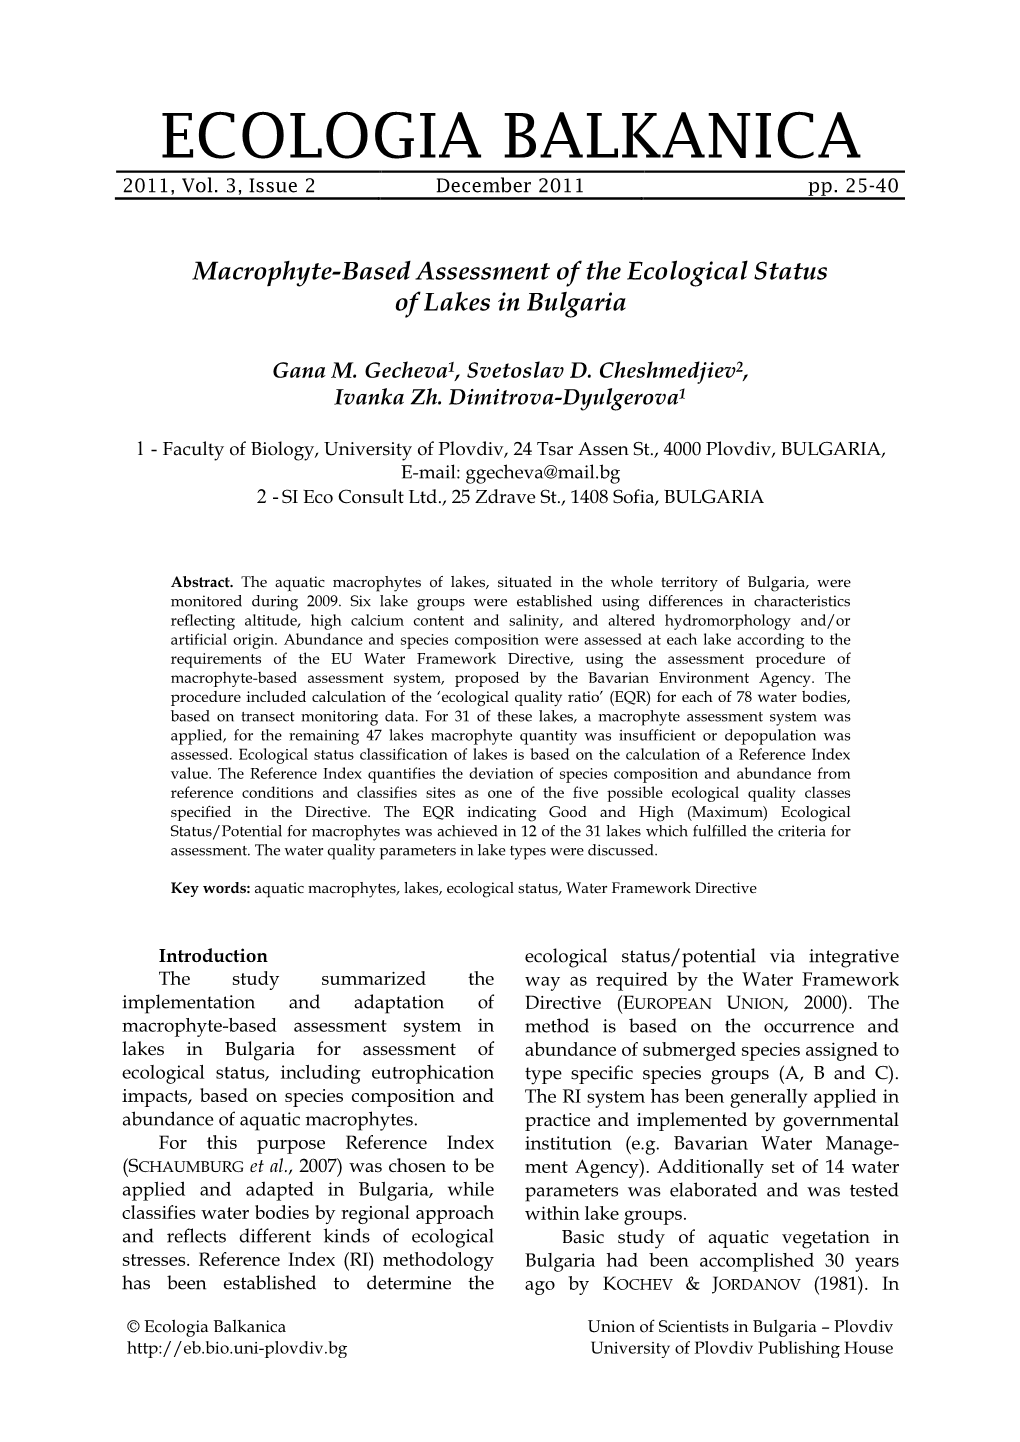 Macrophyte-Based Assessment of the Ecological Status of Lakes in Bulgaria